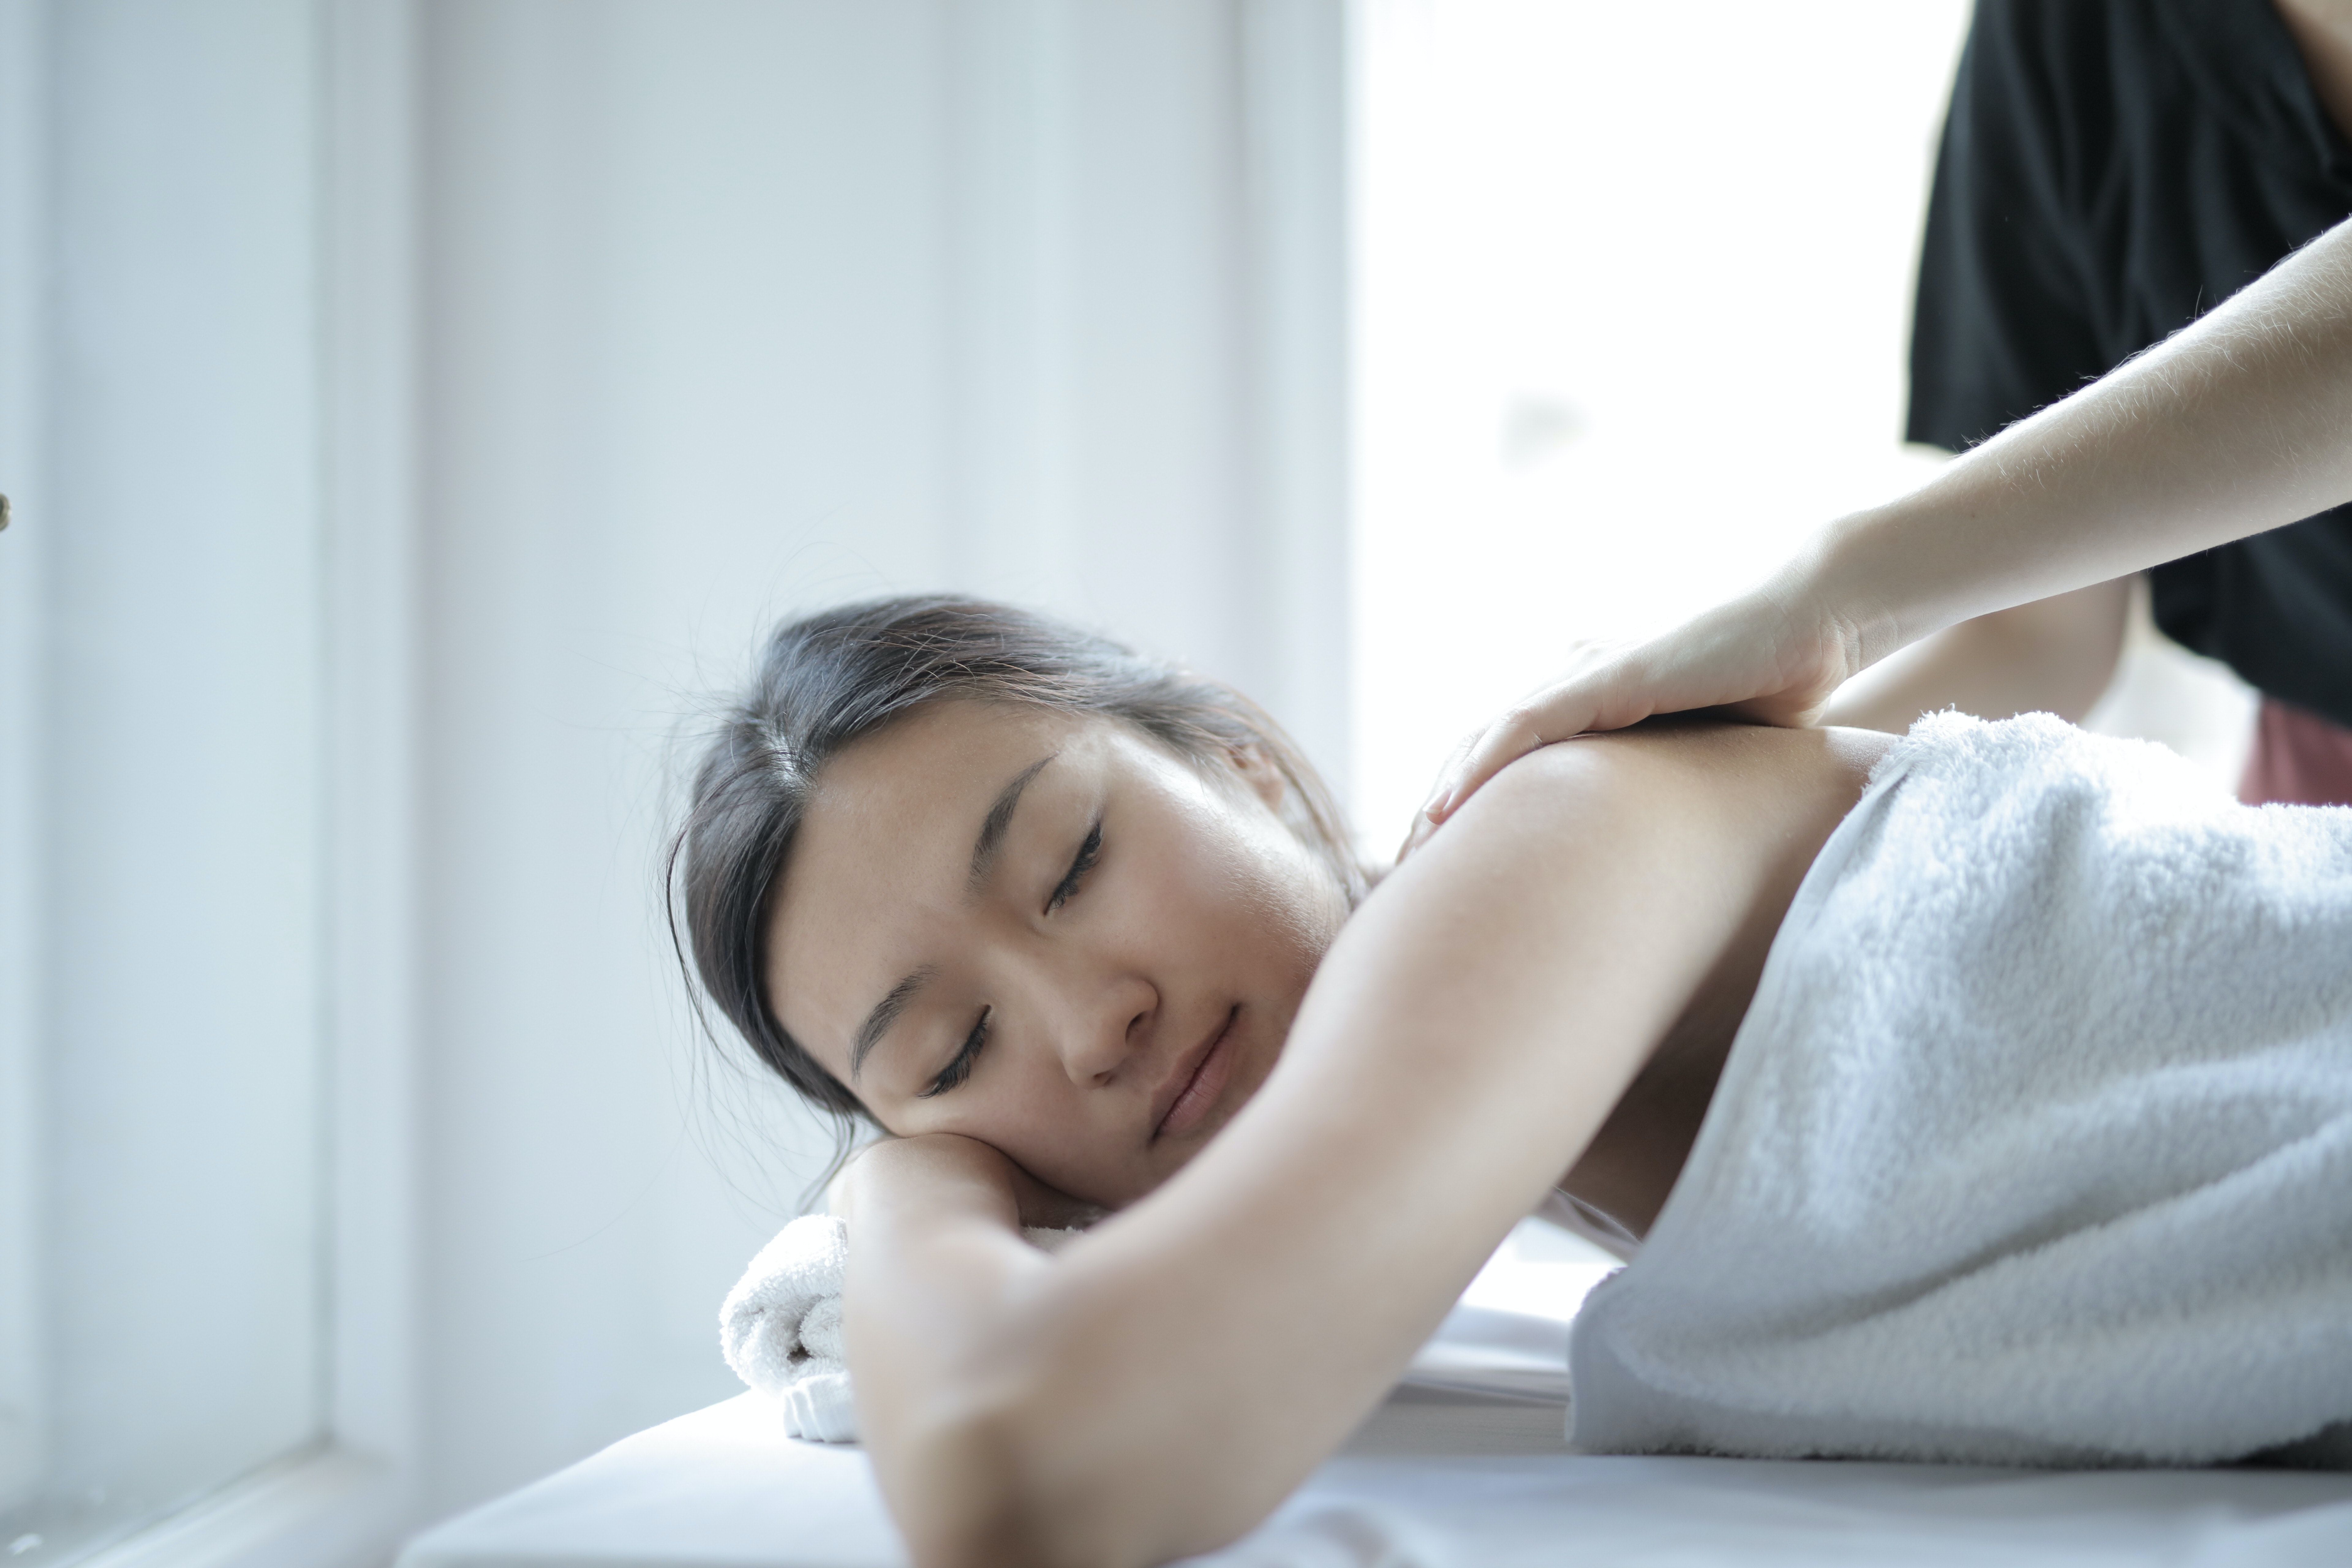 3 Types of Therapeutic Massage You May Not Be Familiar With